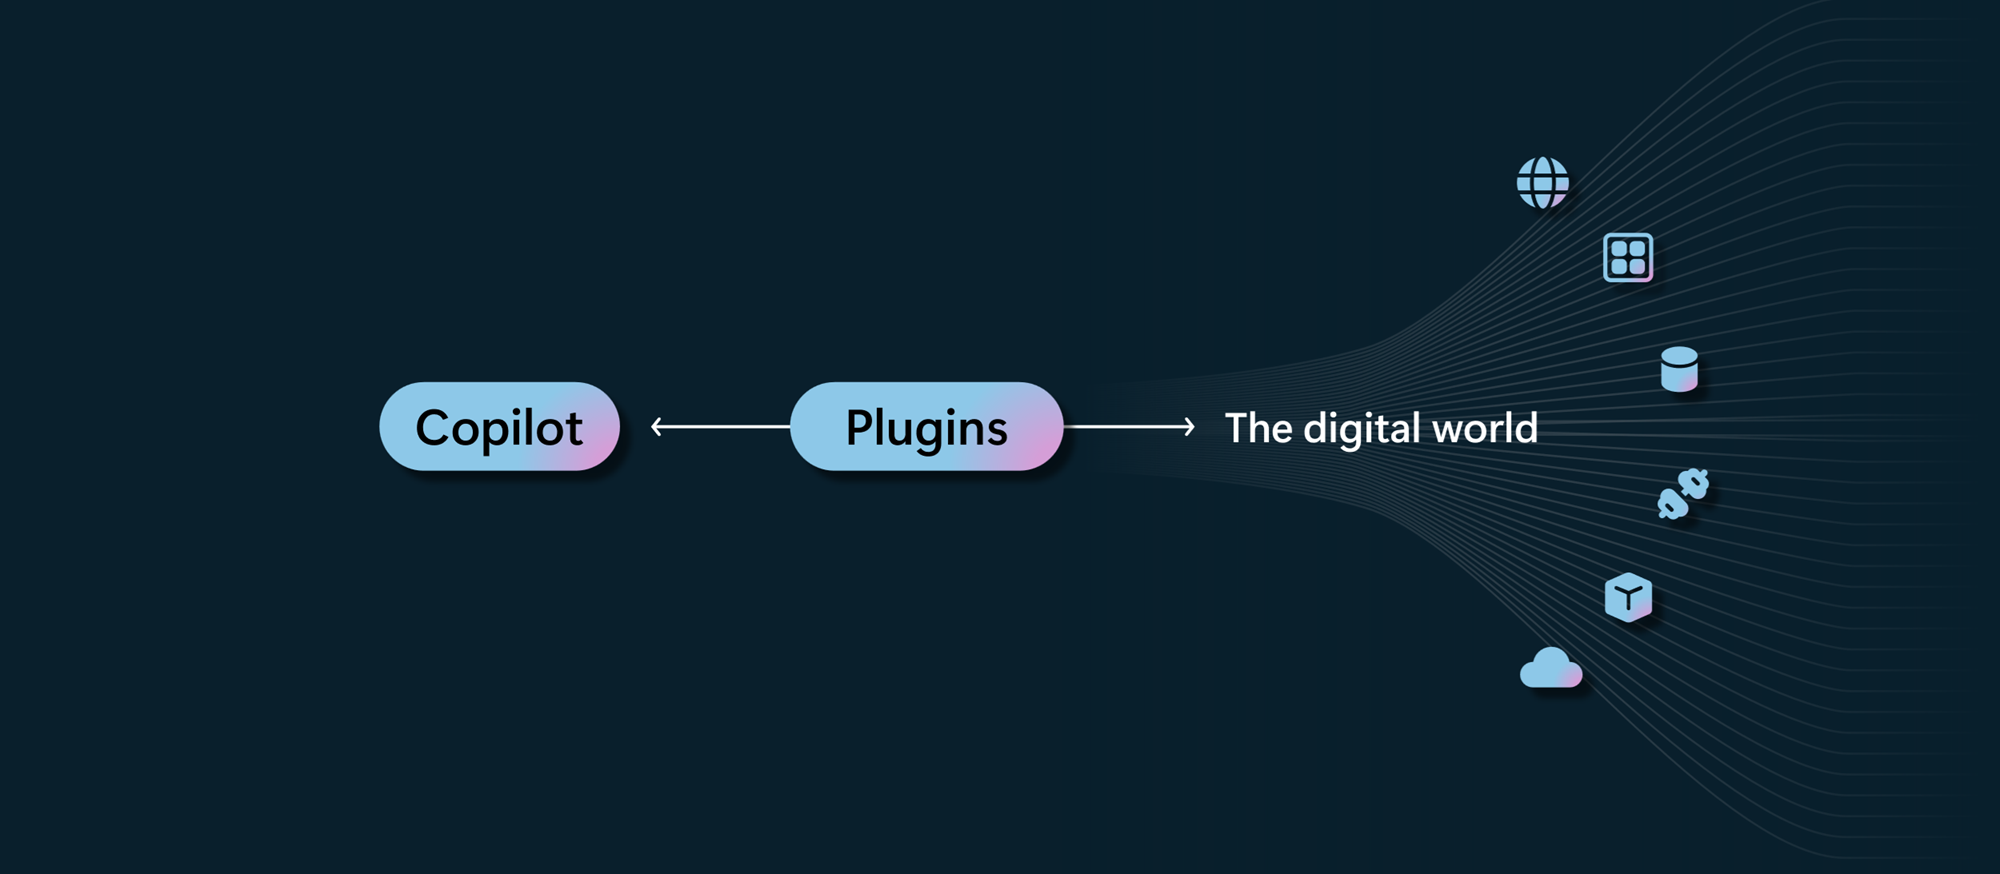 Illustration with an equation-like illustration showing that a copilot with a plugin allows interaction with the digital world.